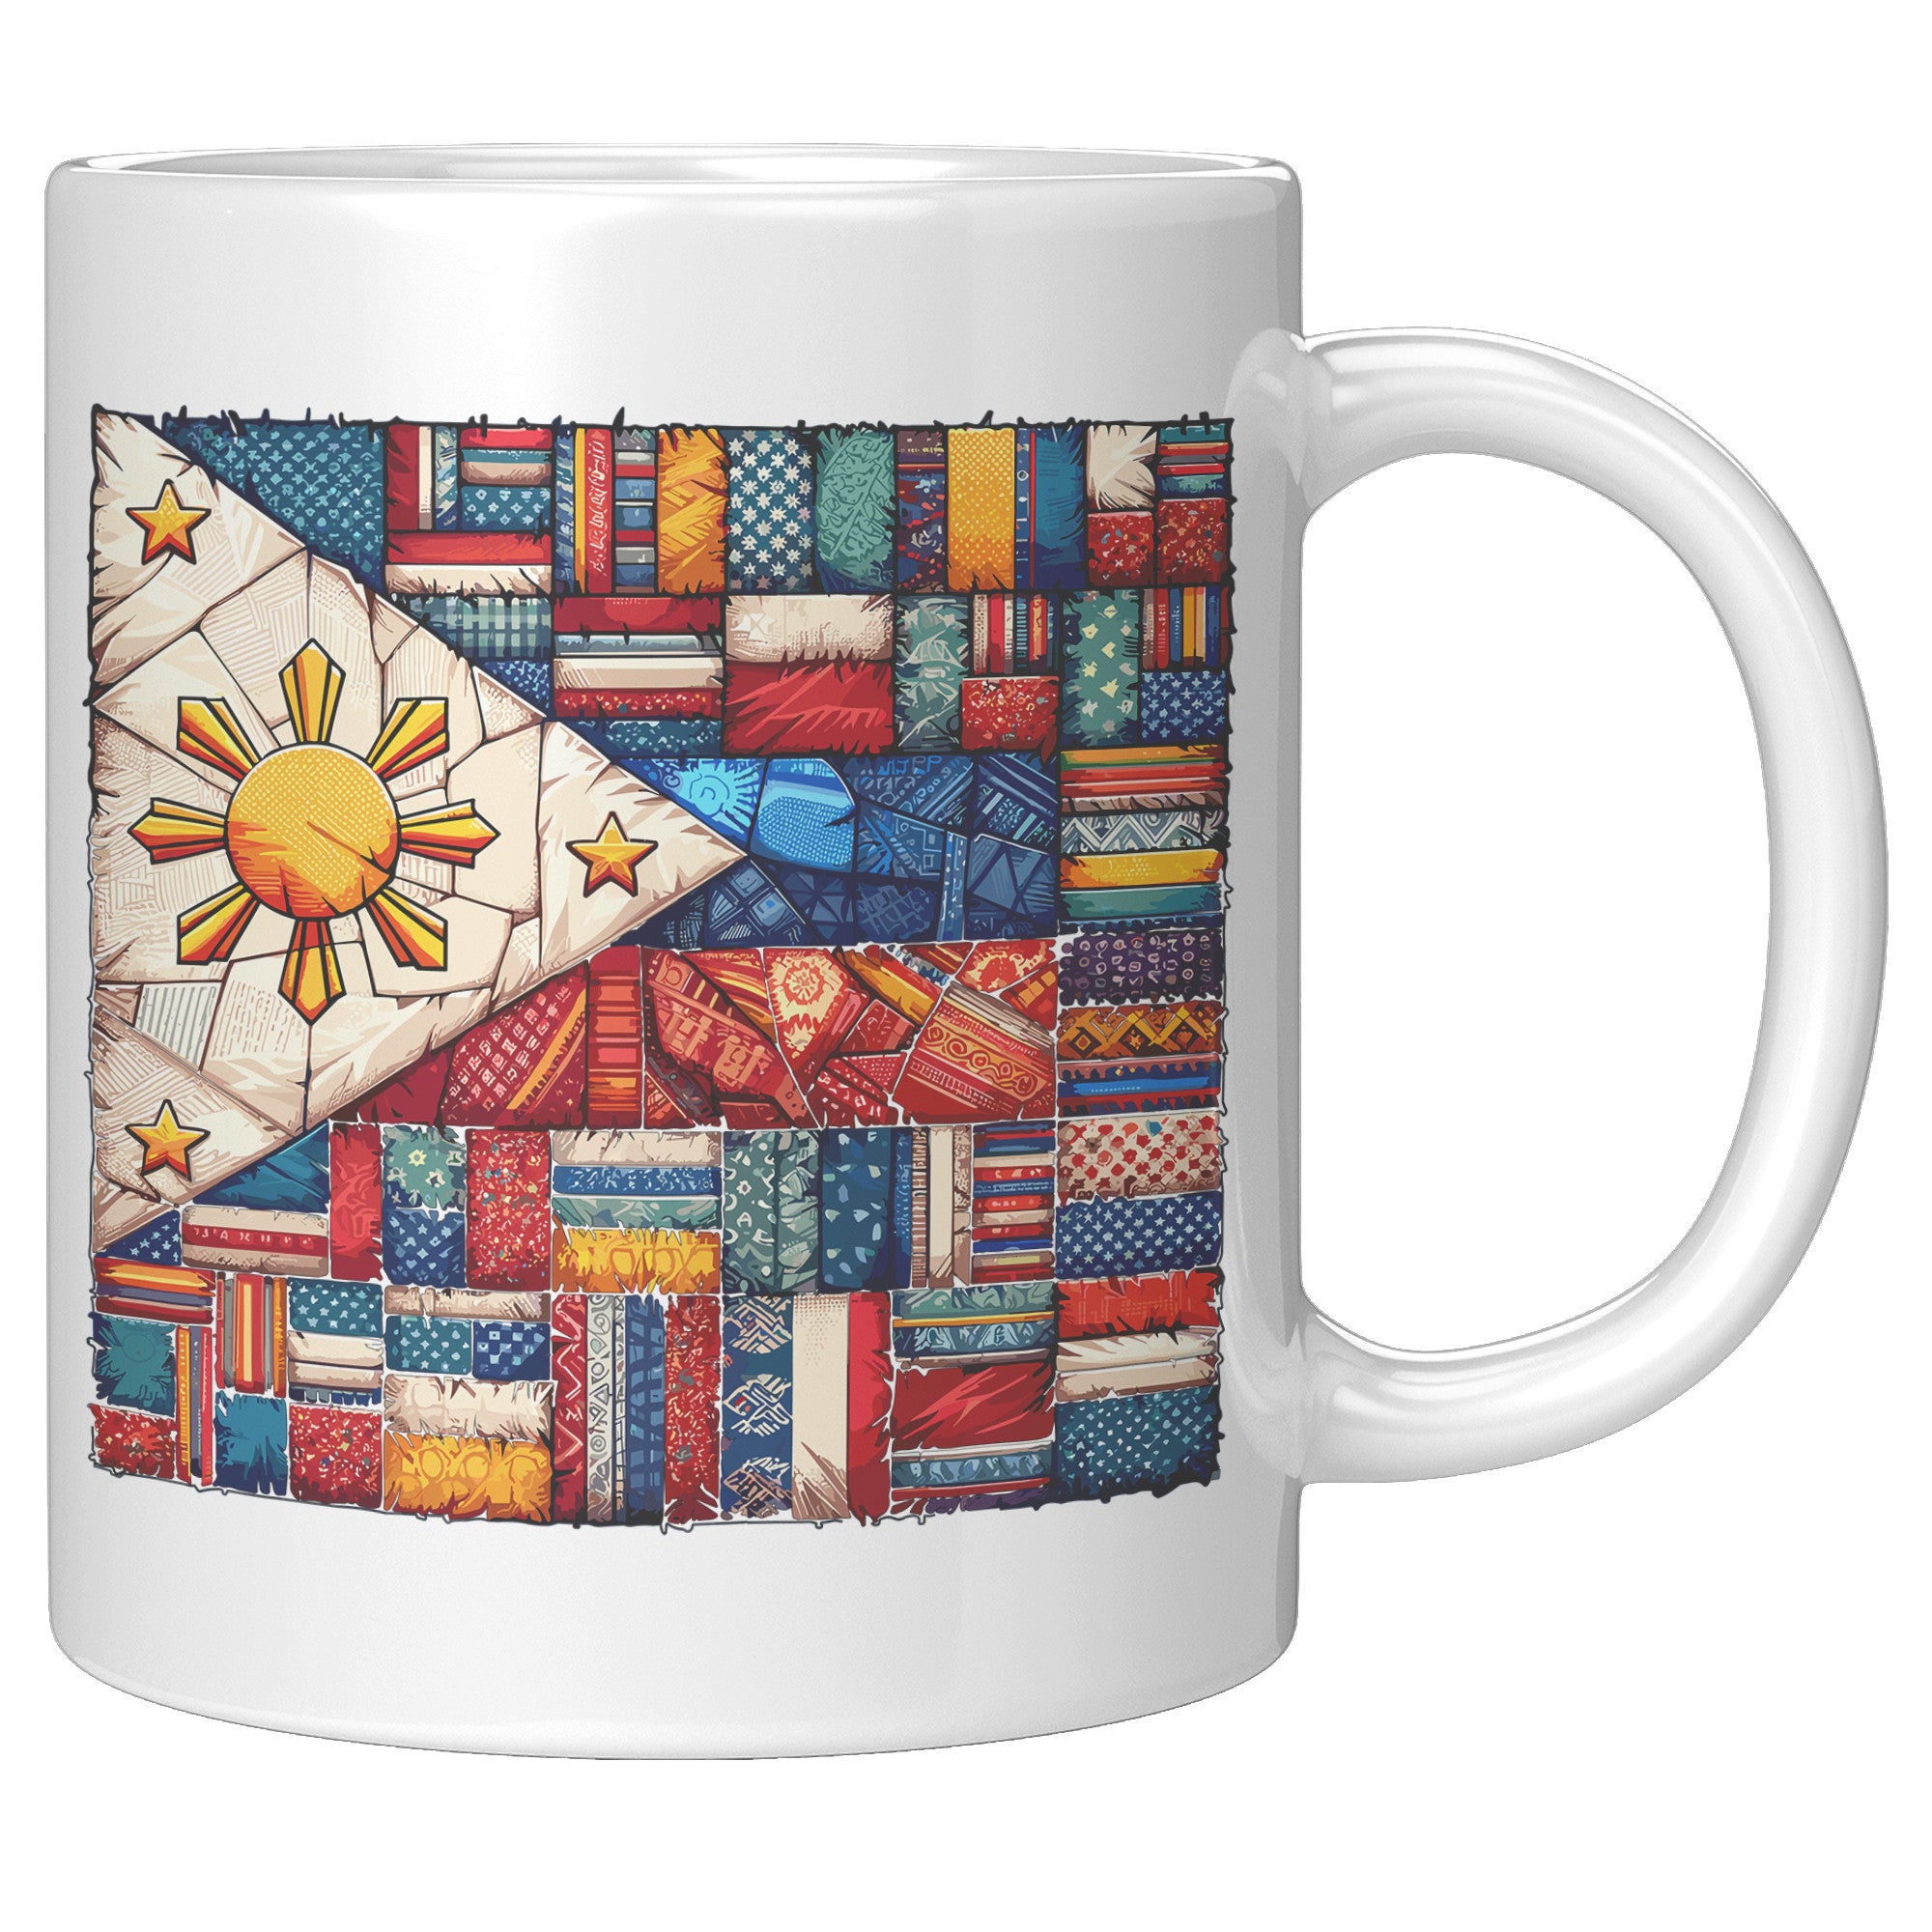 Proudly Pinoy Coffee Mug - Vibrant Filipino Flag Design - Patriotic Gift for Filipinos - Celebrate Heritage with Every Sip!" - G